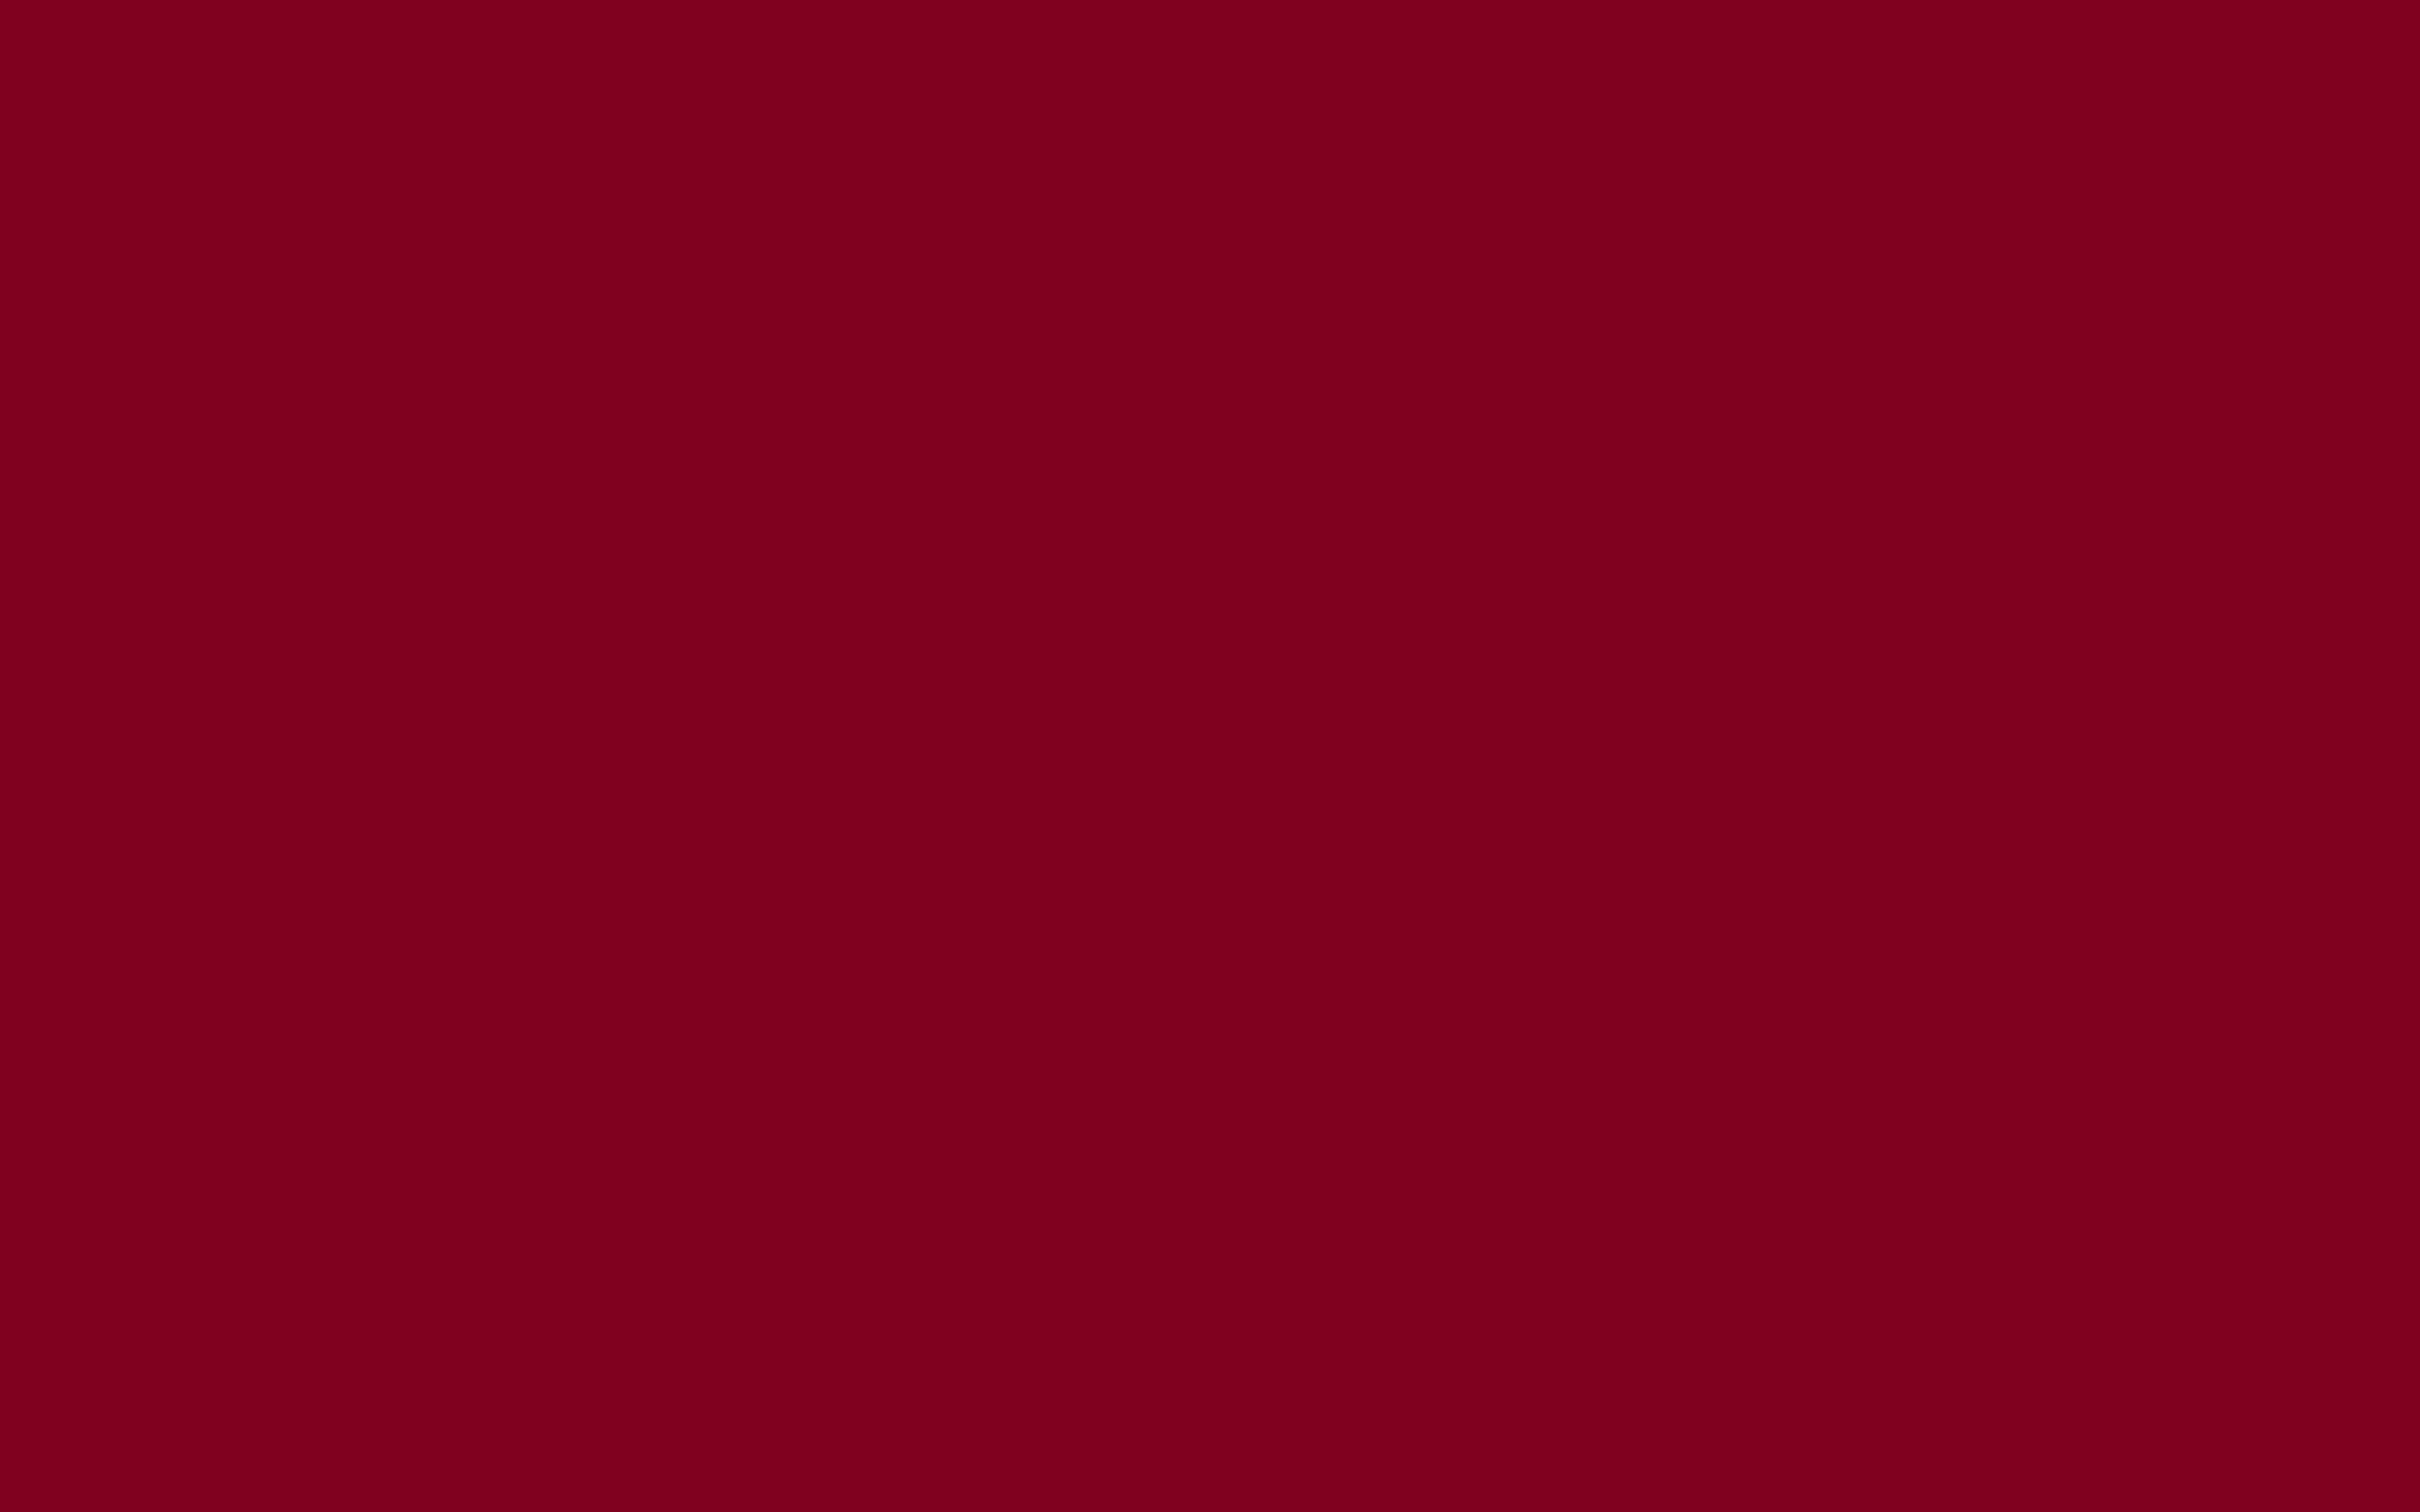 Free 2880x1800 resolution Burgundy solid color background view and